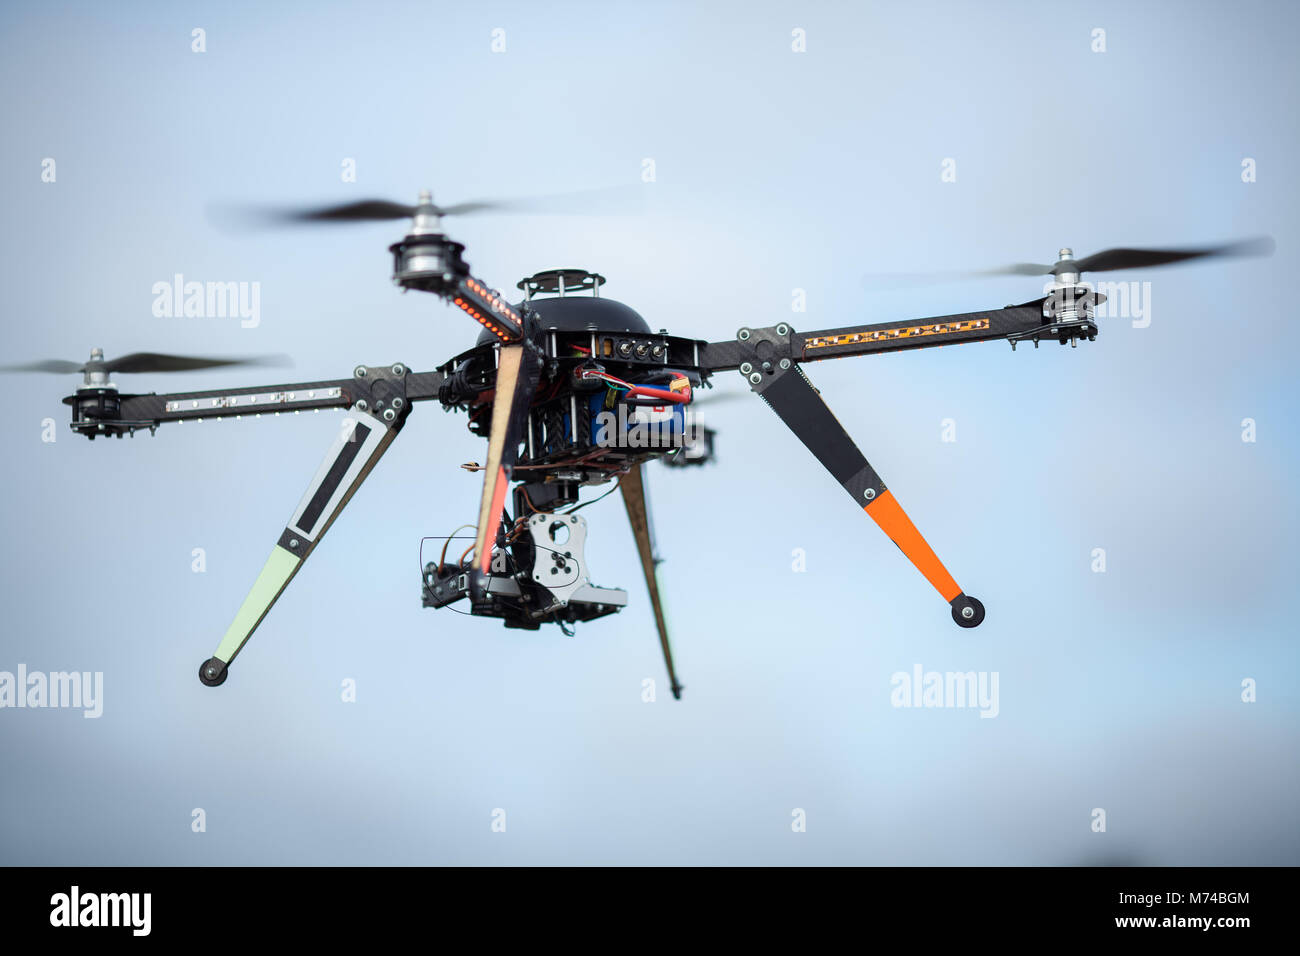 Big Carbon Drone dslr dji summer in the air with gimbal RC RX with  propellers Stock Photo - Alamy